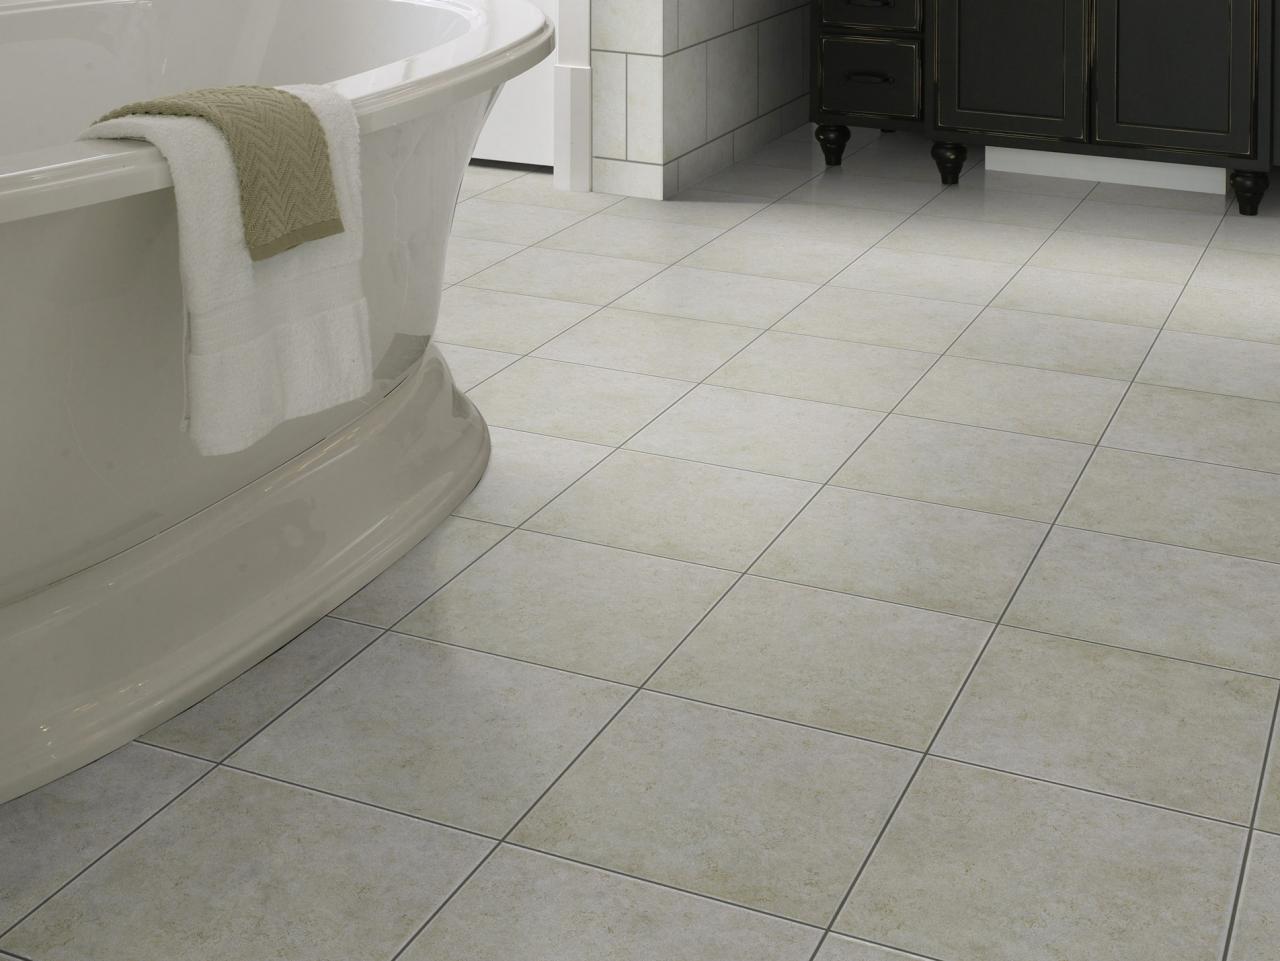 Why Homeowners Love Ceramic Tile, What Is The Best Type Of Flooring For Bathroom